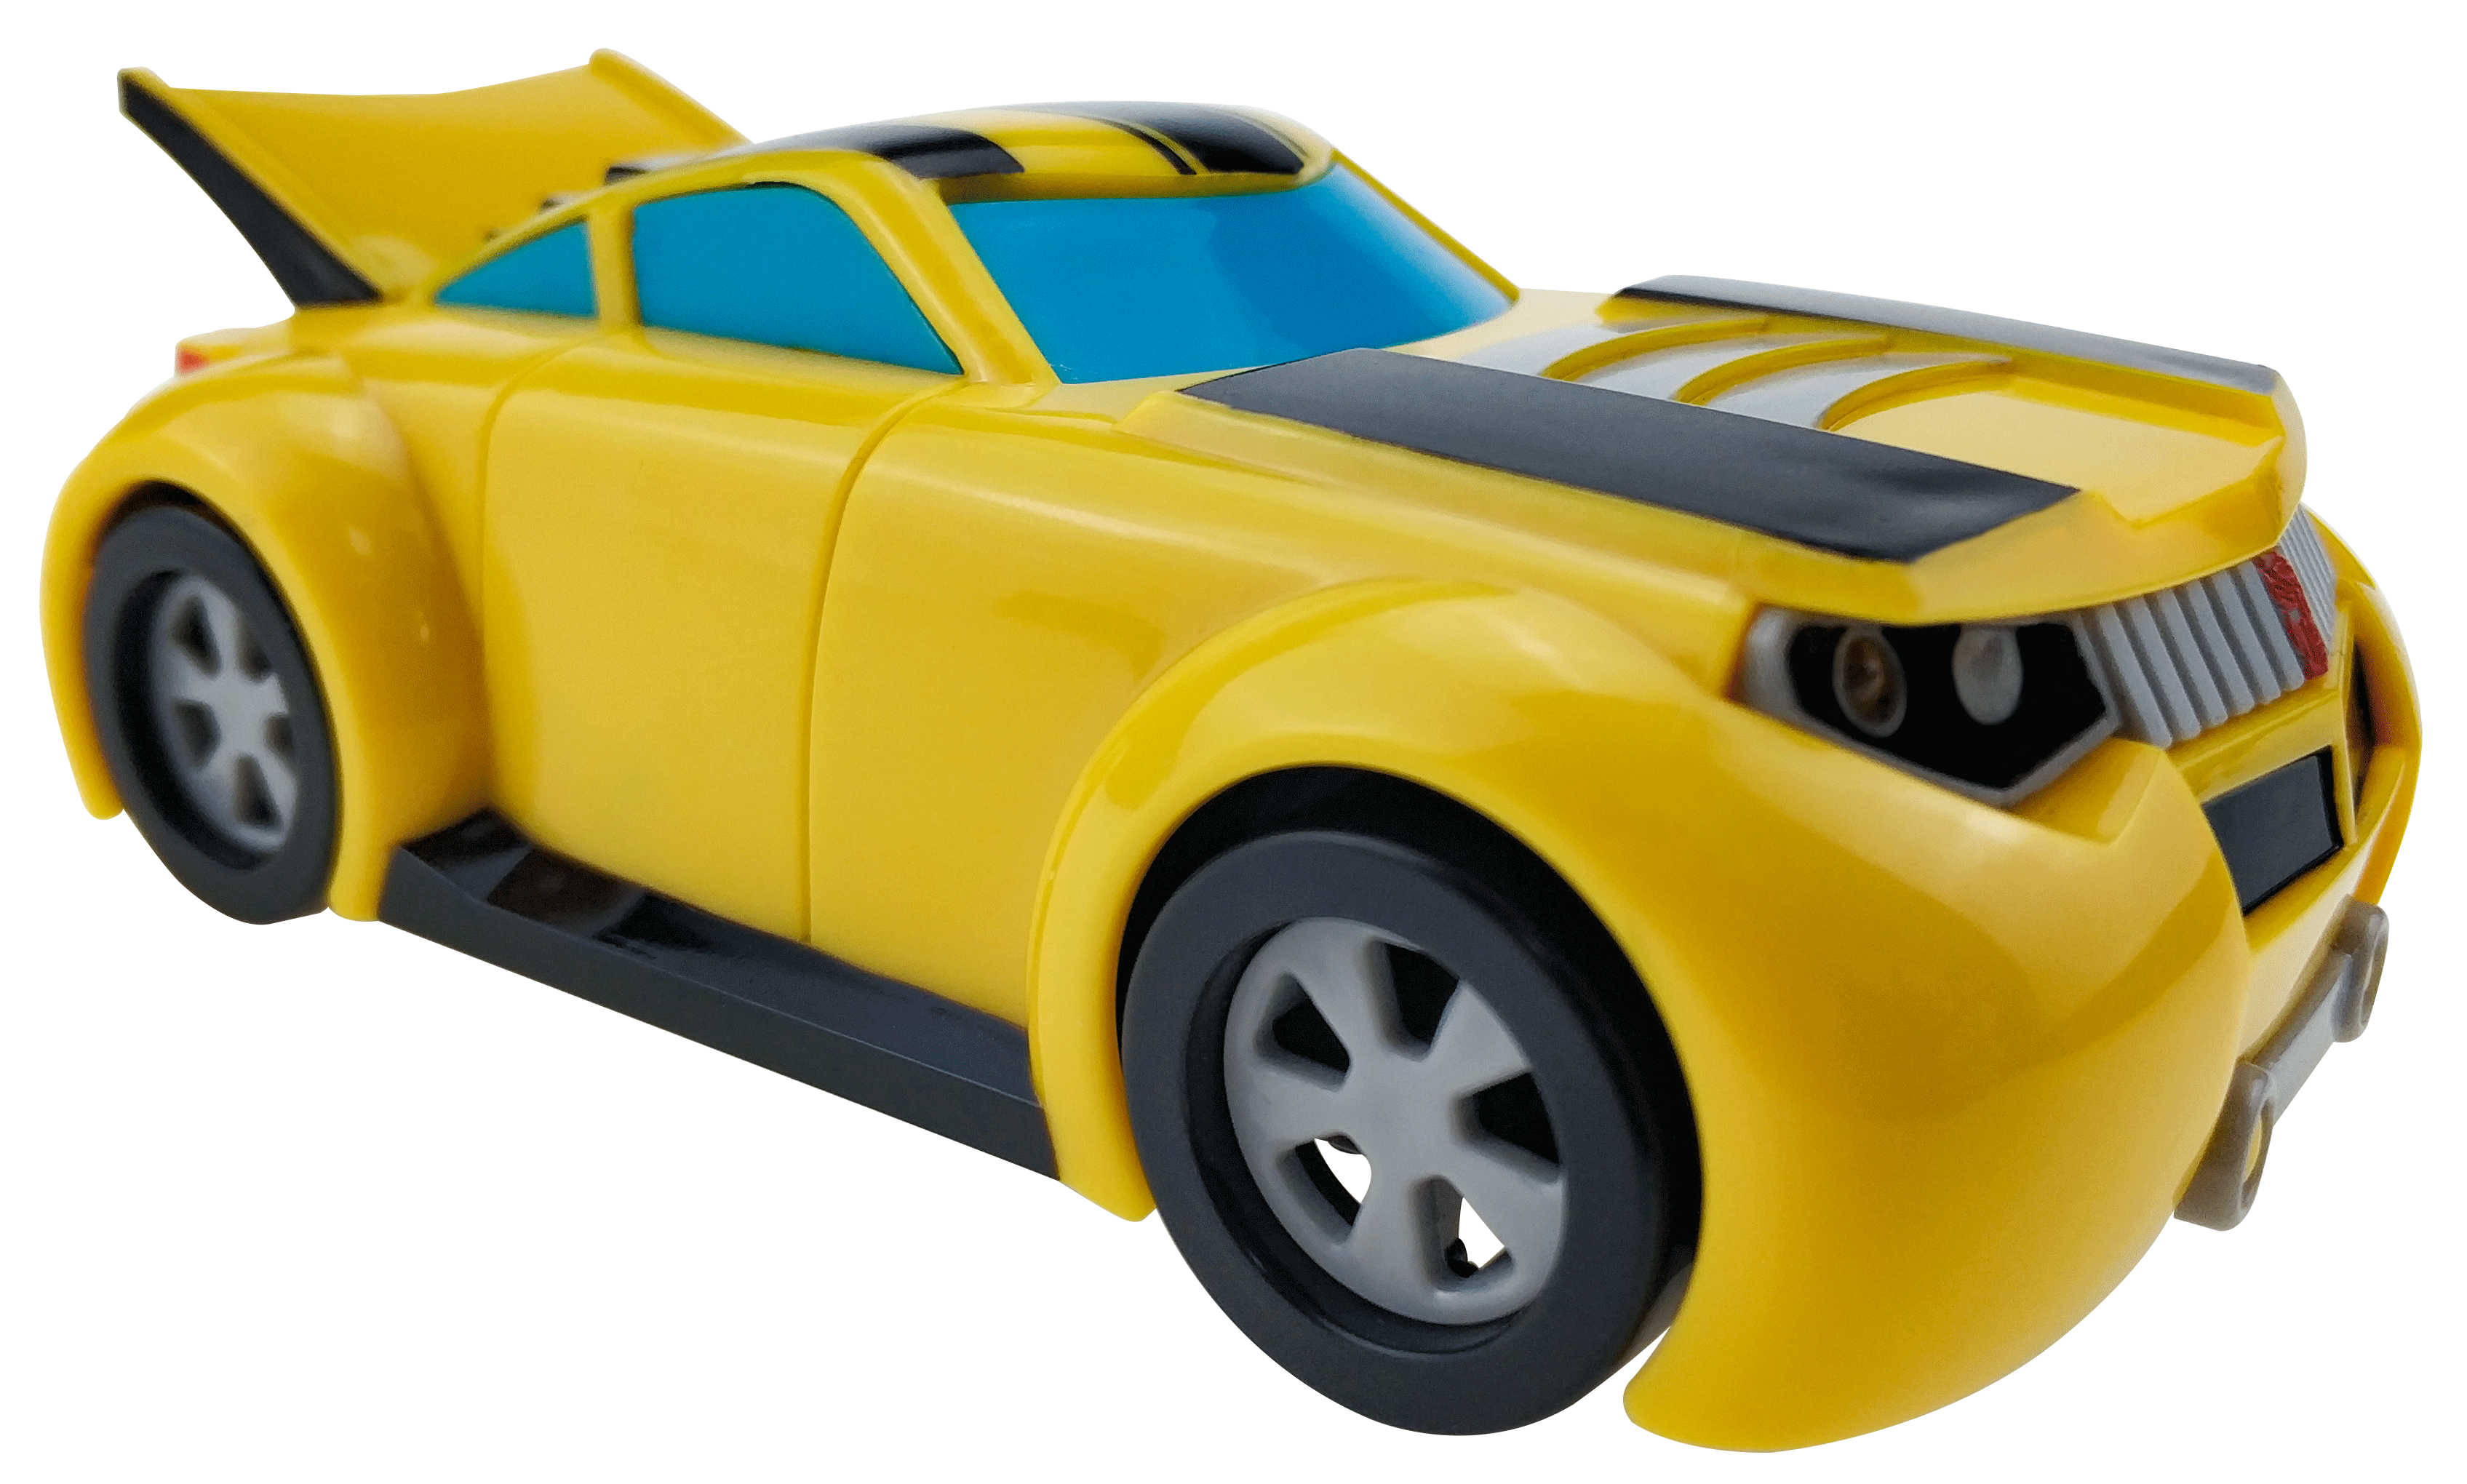 Transformers Rescue Bots 12CM Bumblebee Friction Car